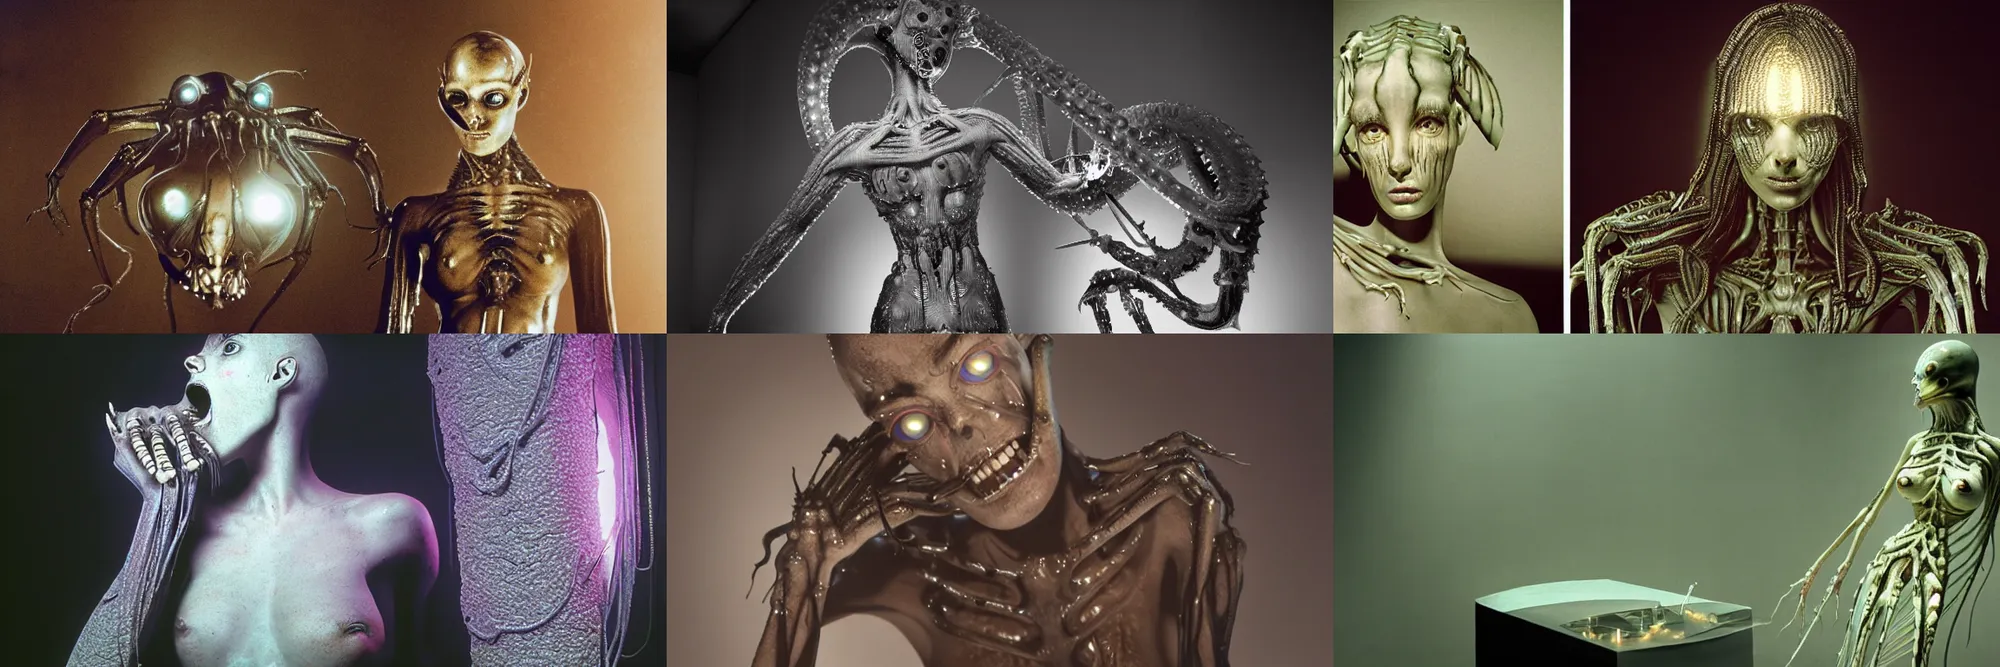 Prompt: A photorealistic sculpture designed by H.R. Giger of a bio-mechanical woman fused with a squid and spider eyes on a LED crystal podium. Shot on film by blade runner Cinematographer jordan cronenweth in a dark art gallery illuminated over head by a a single dim kinoflo light surrounded with volumentric haze